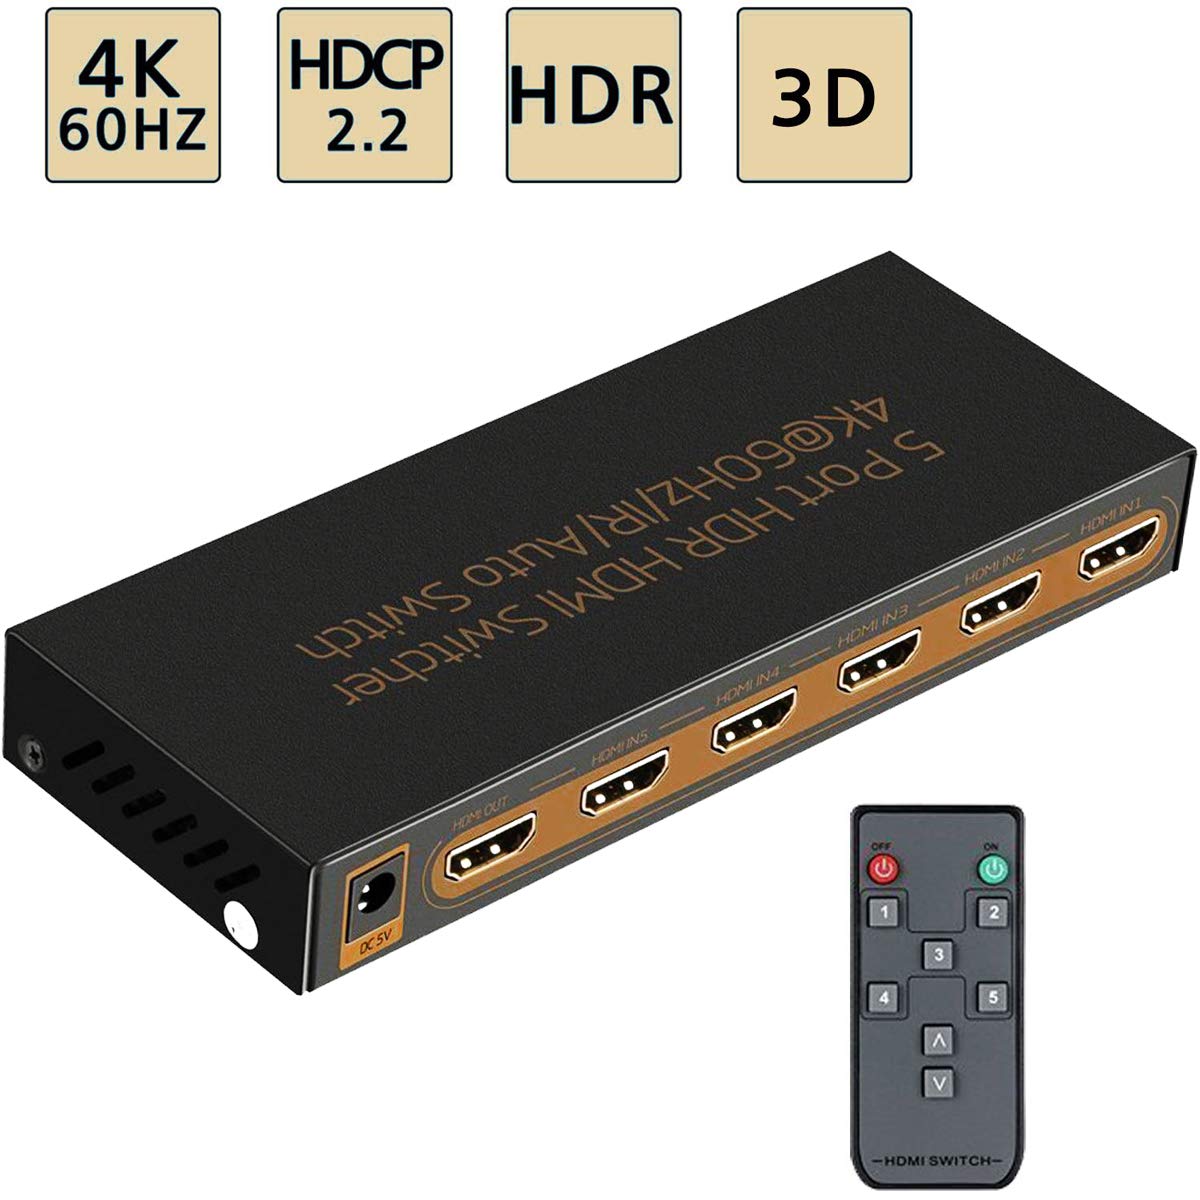 4K@60Hz HDMI Switch 5x1 Awakelion Premium 5 in 1 Out HDMI 2.0 Switcher with IR Remote Support HDCP 2.2 UHD HDR Full HD 3D 1080P.